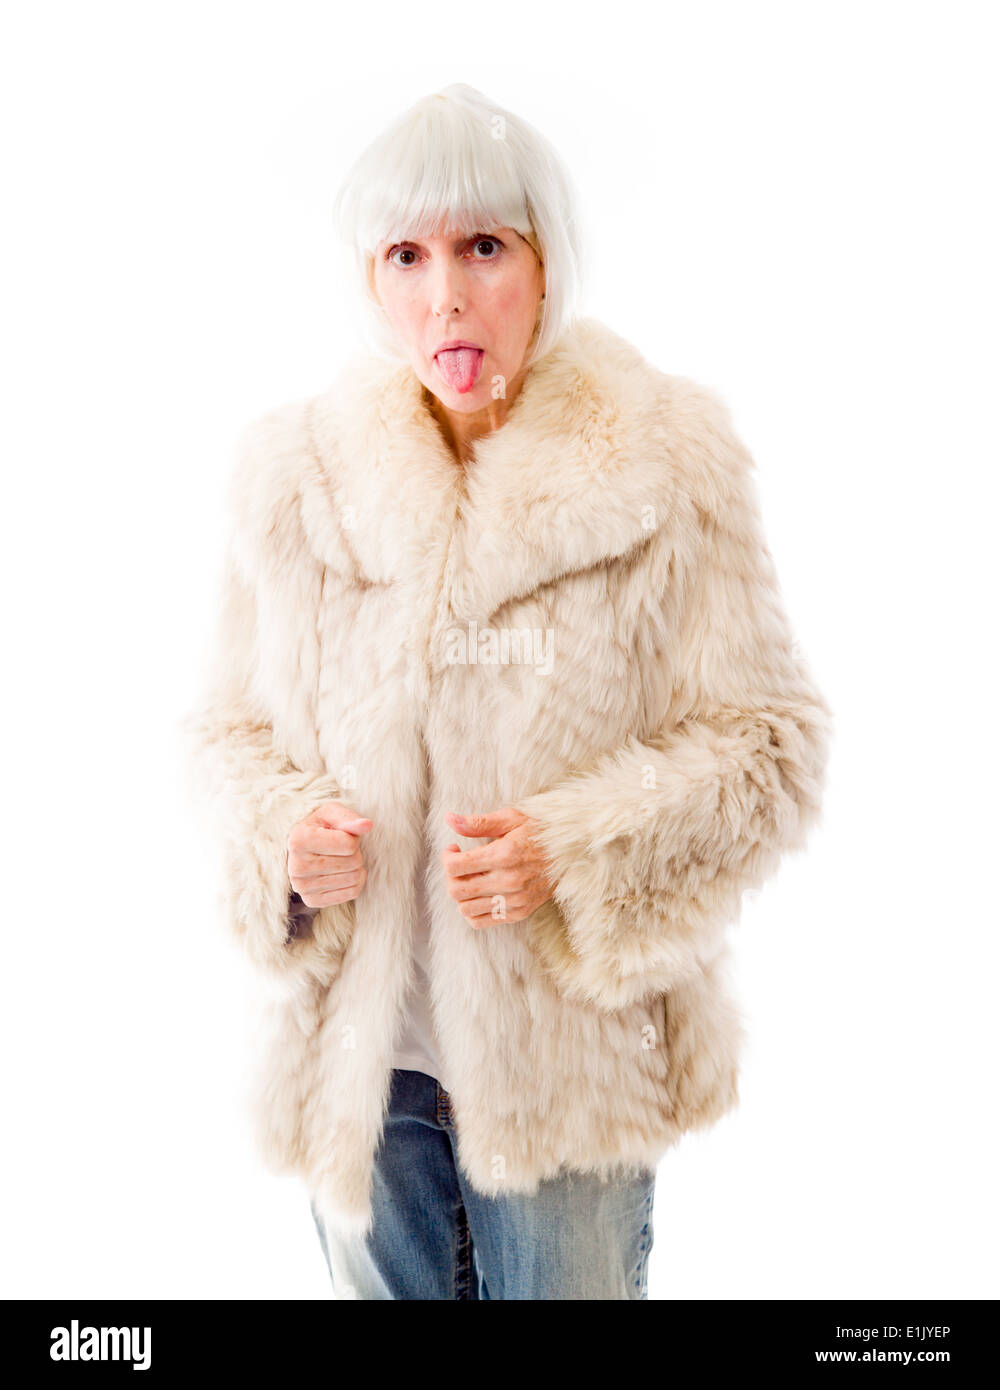 Senior woman sticking out her tongue Stock Photo